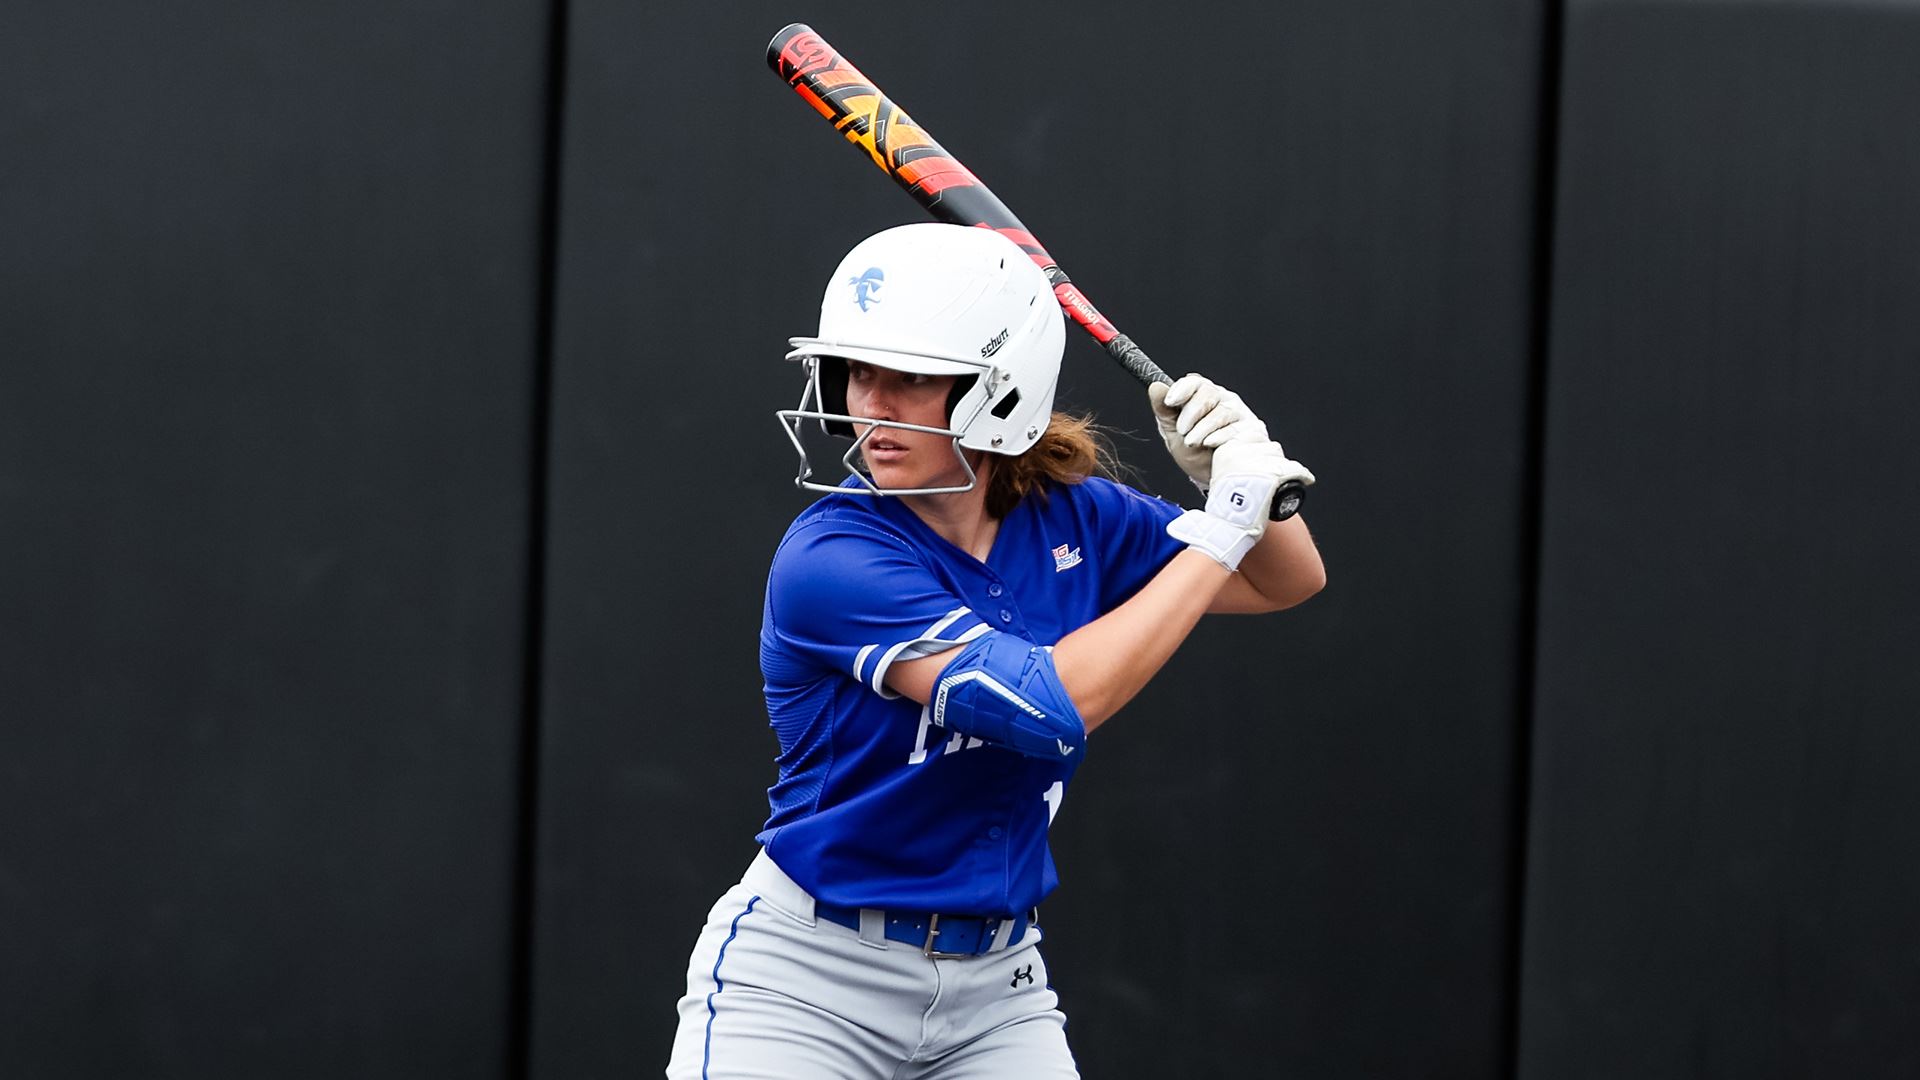 A Seton Hall softball stands in the batter's box during a home game.